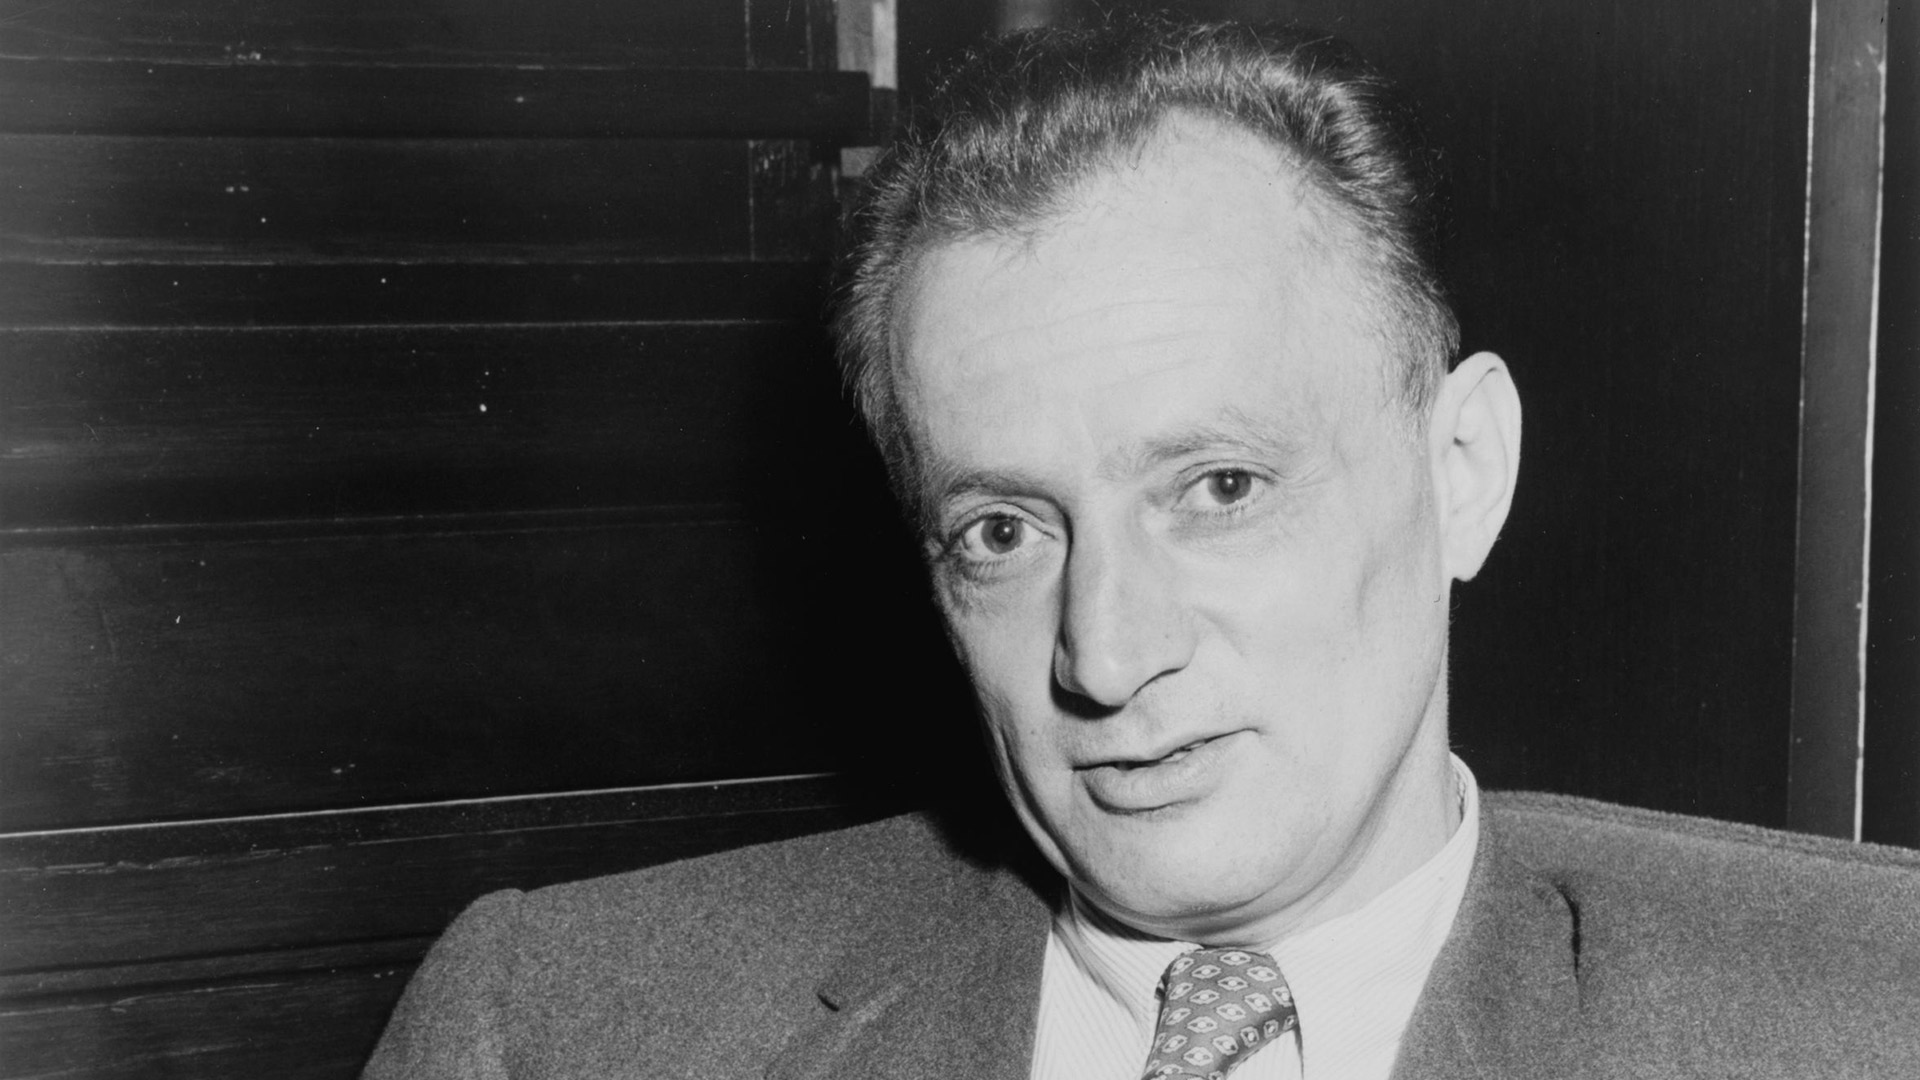 Nelson Algren sitting in a suit looking at the camera and holding a paper